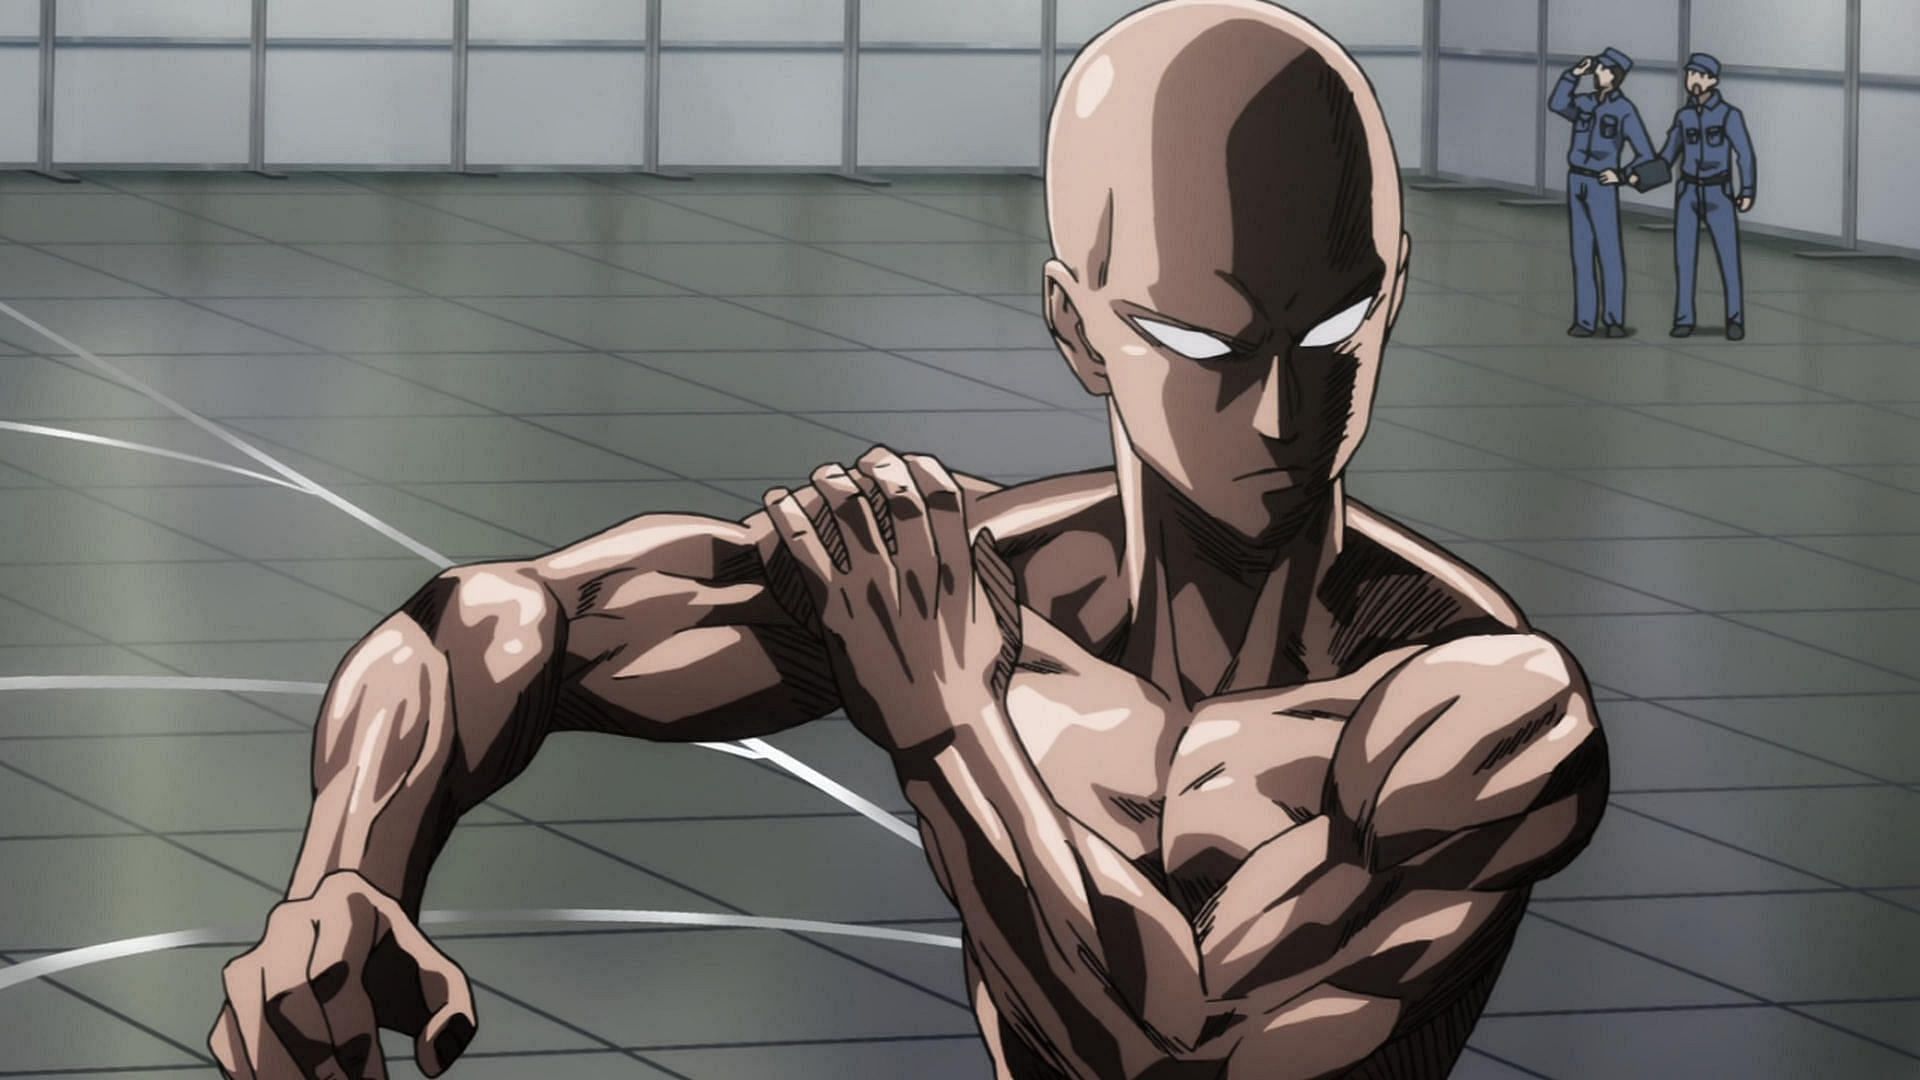 A still from the first season of One Punch Man featuring Saitama (Image via Madhouse)